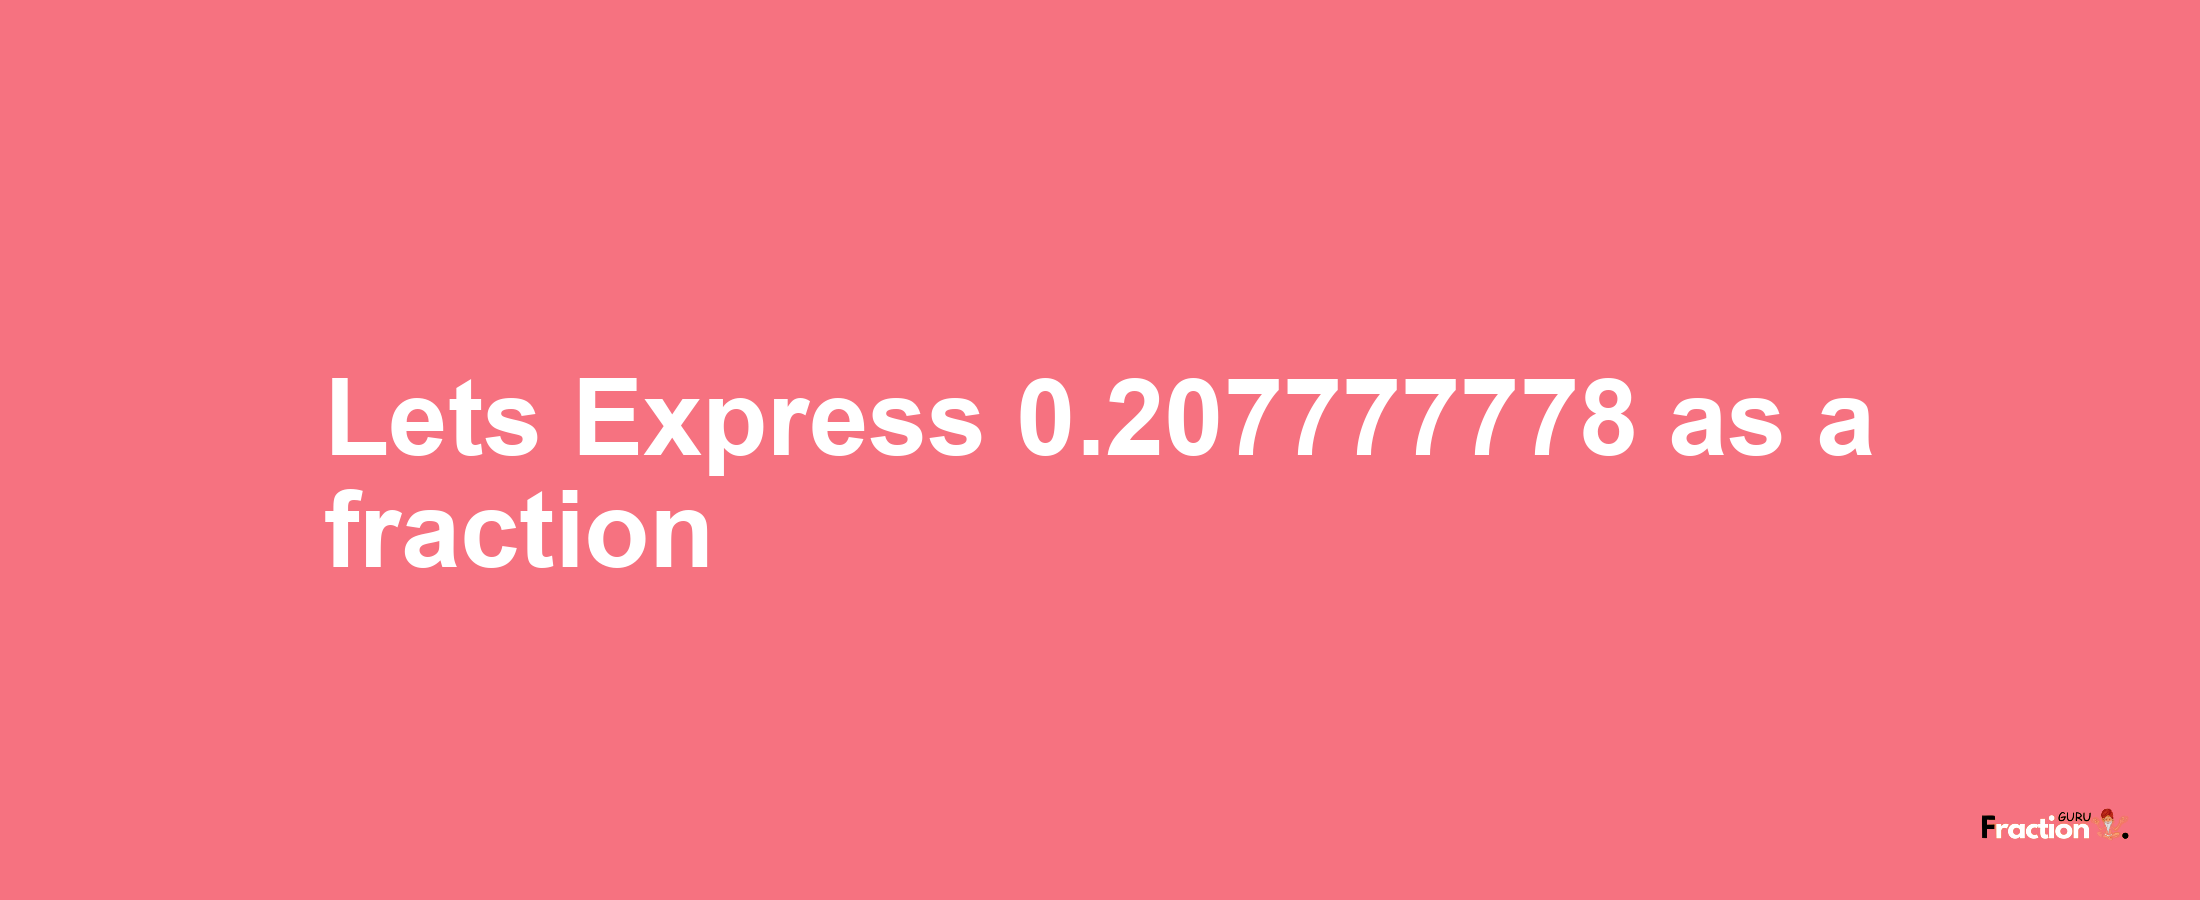 Lets Express 0.207777778 as afraction